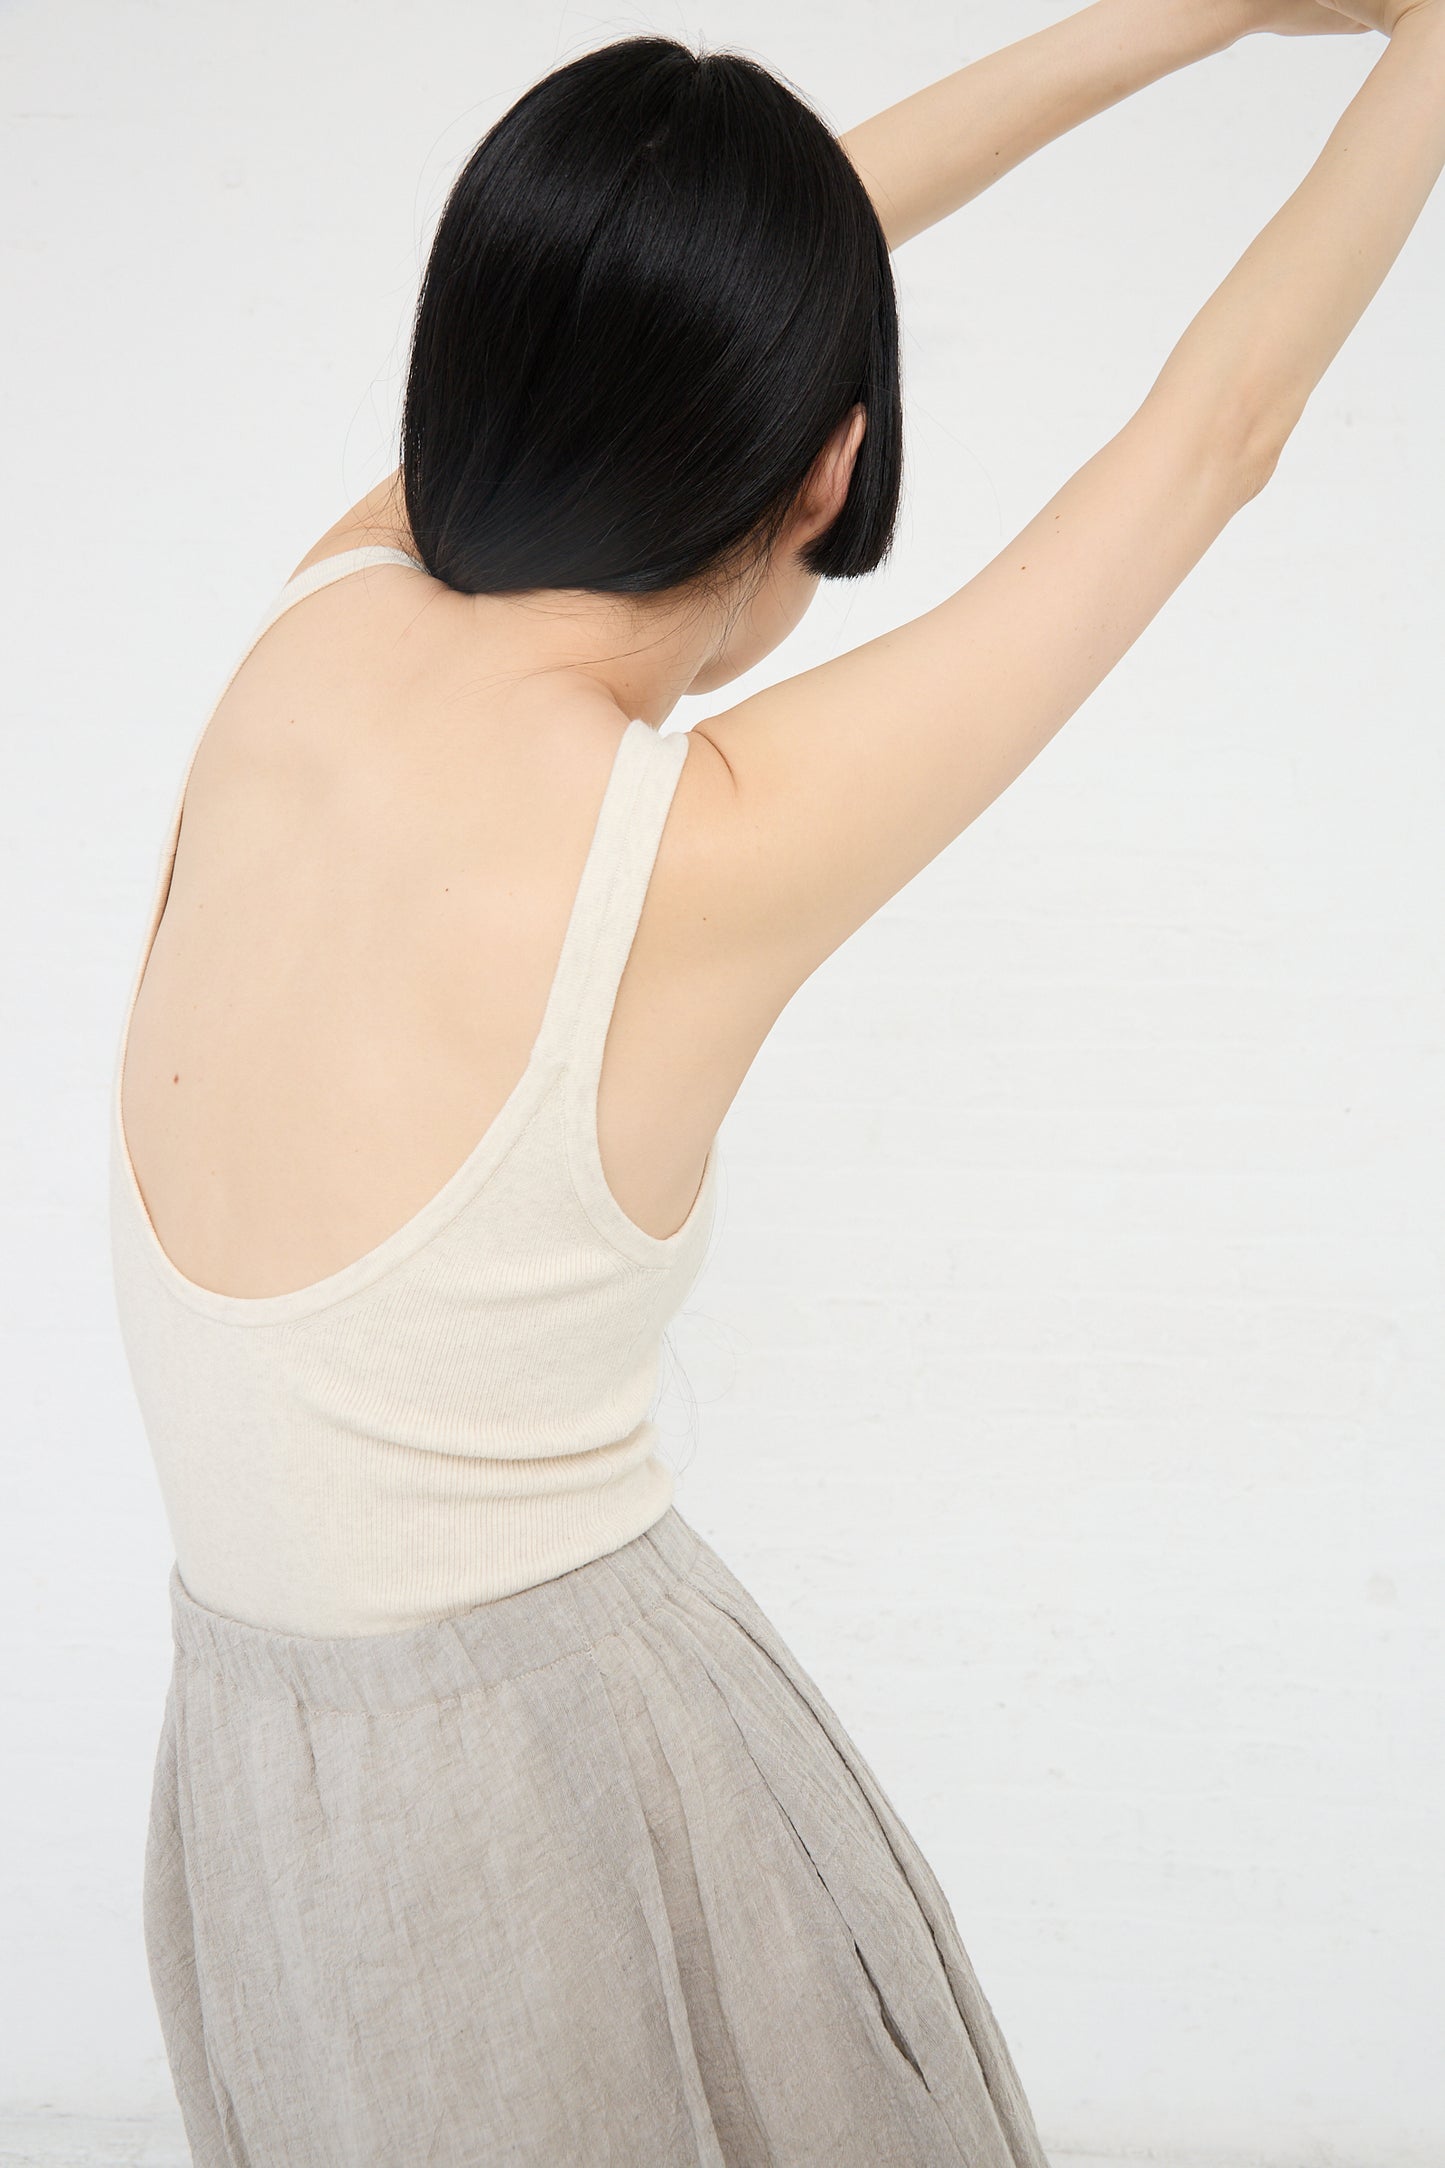 A woman with her back turned, reaching up with one arm, wearing a Rib Bodysuit in Hessian and skirt against a white background by Lauren Manoogian.